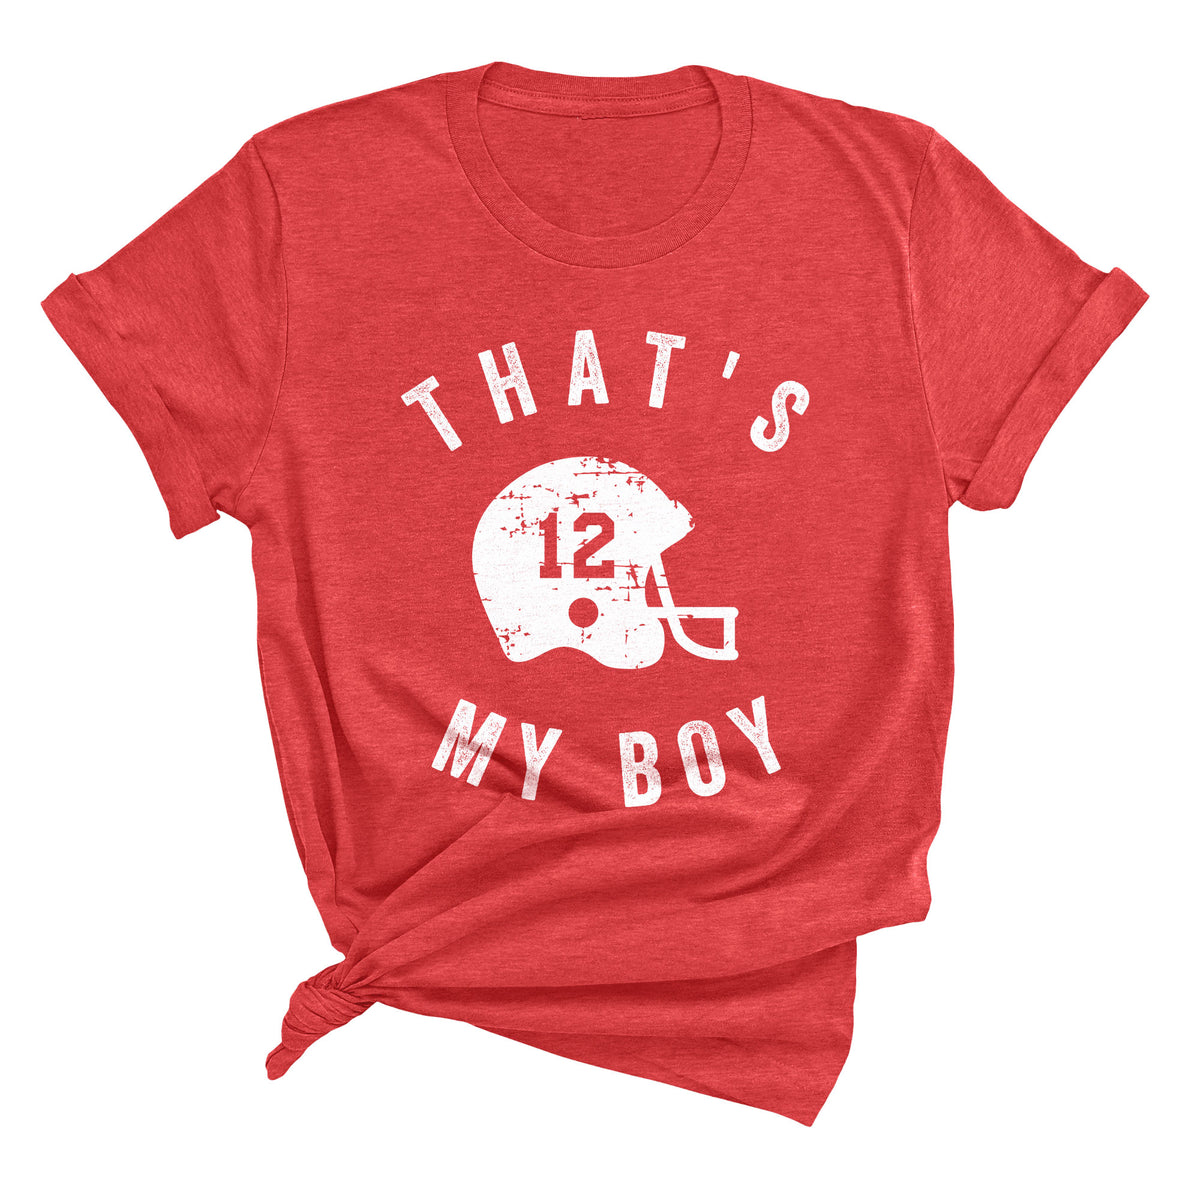 That's My Boy with Helmet & Personalized Player Number Unisex T-Shirt